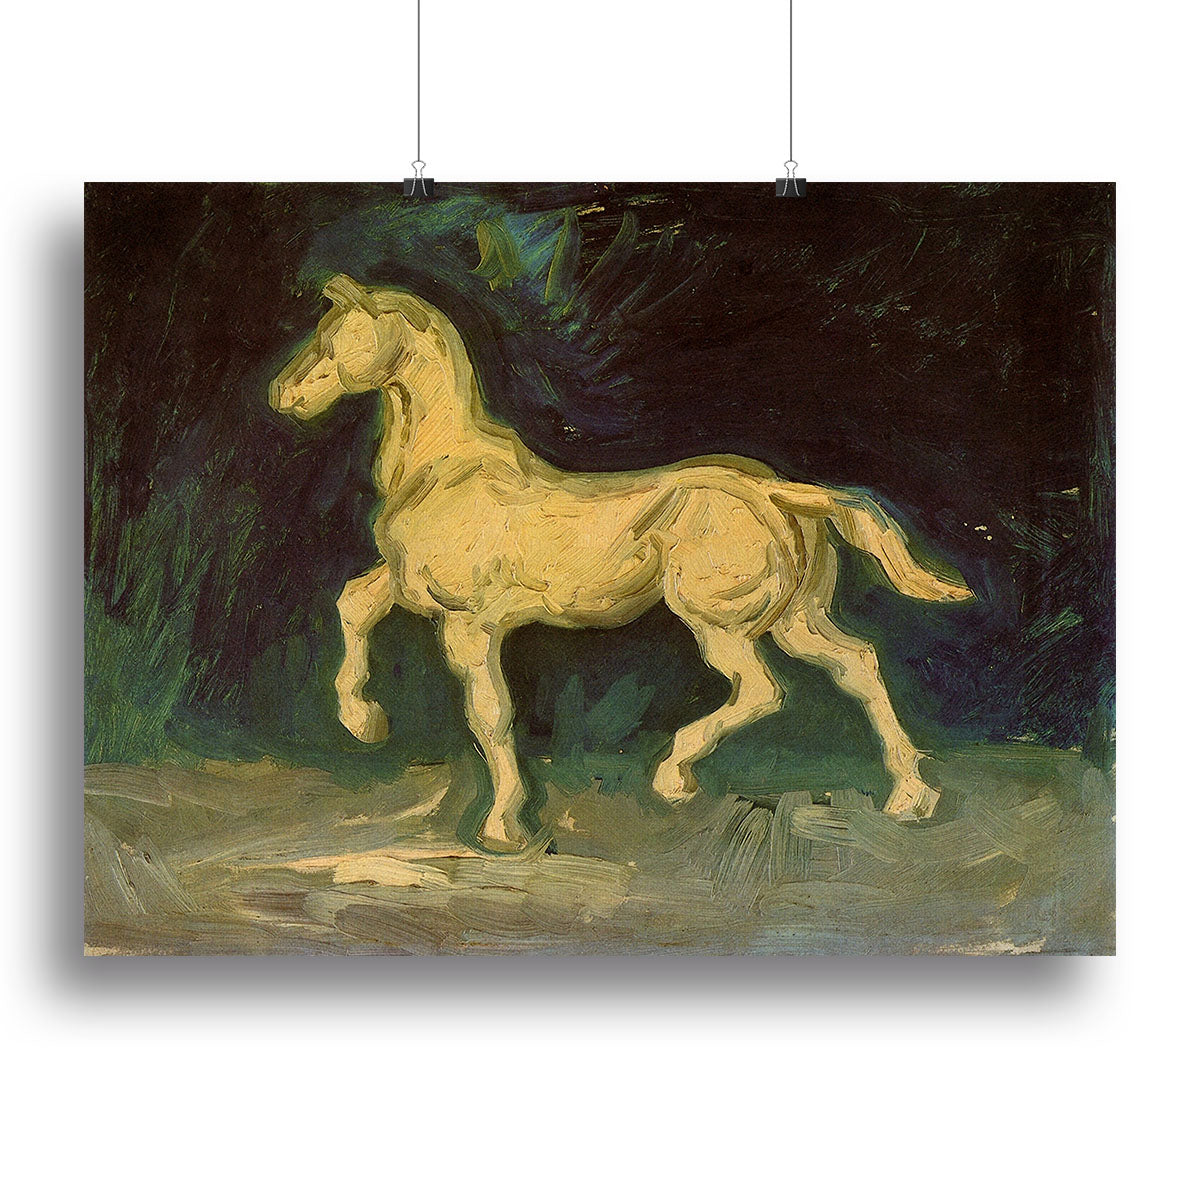 Plaster Statuette of a Horse by Van Gogh Canvas Print or Poster - Canvas Art Rocks - 2